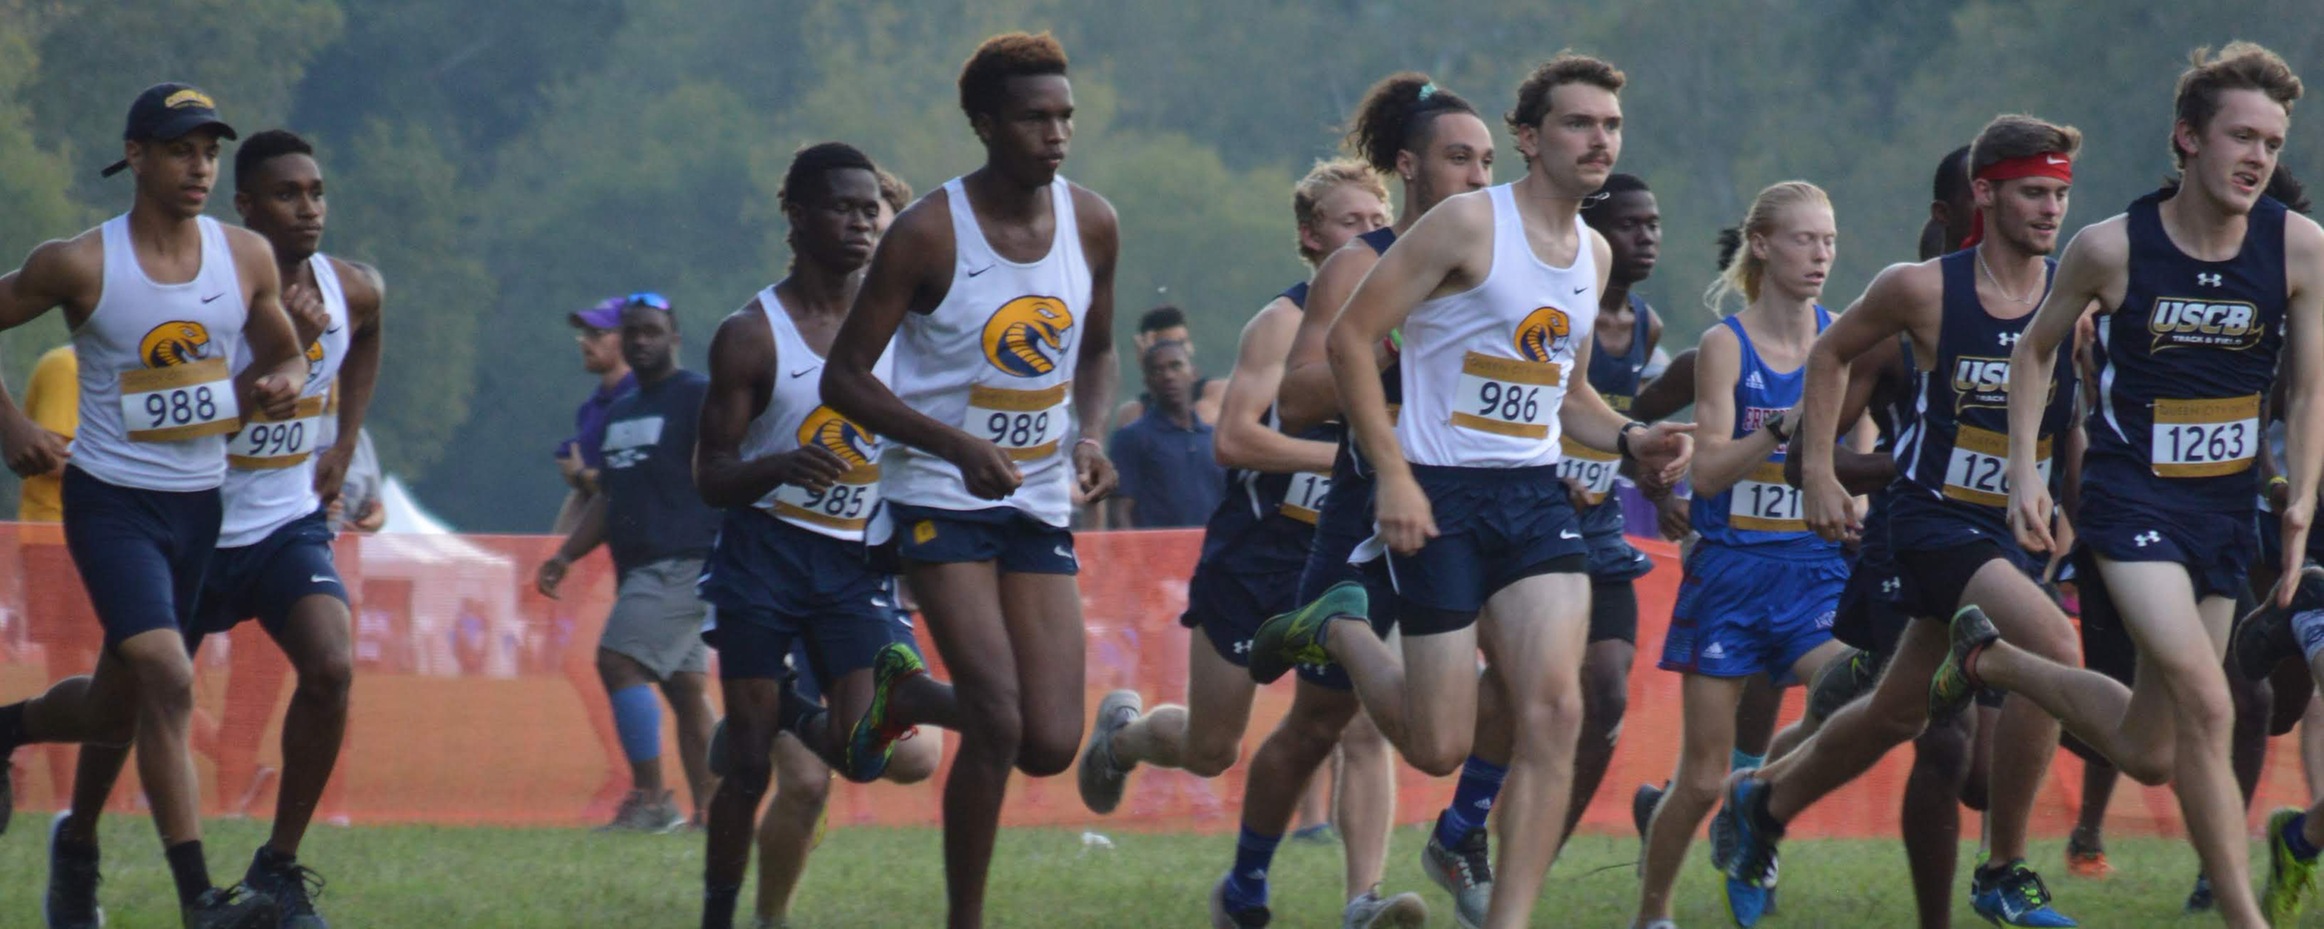 Coker Men's Cross Country Achieves Several Personal Best Records at Royals XC Challenge